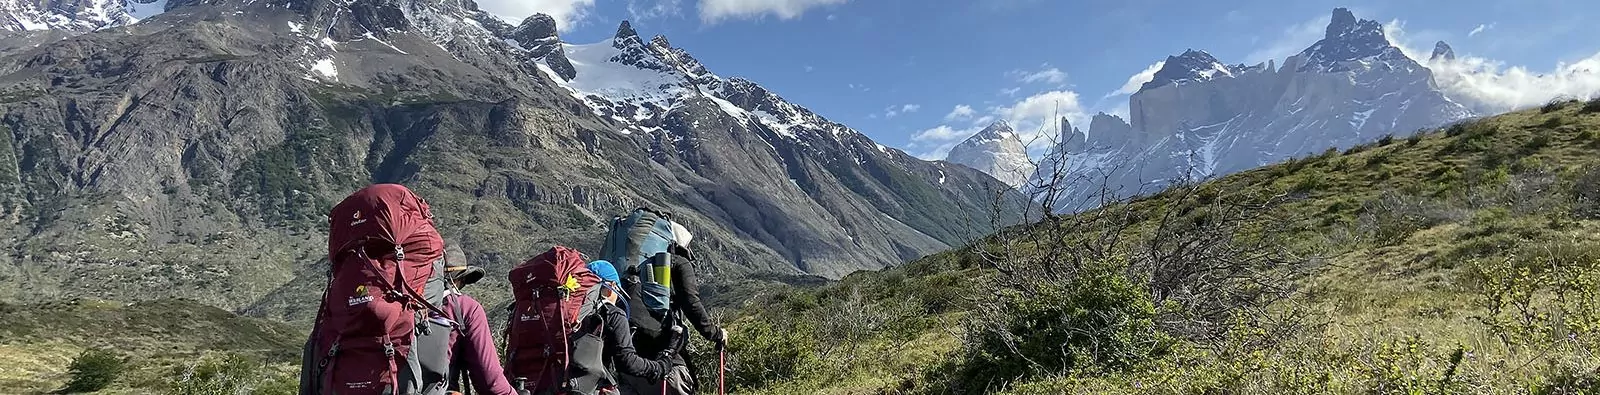 Hikers in Torres del Paine National Park